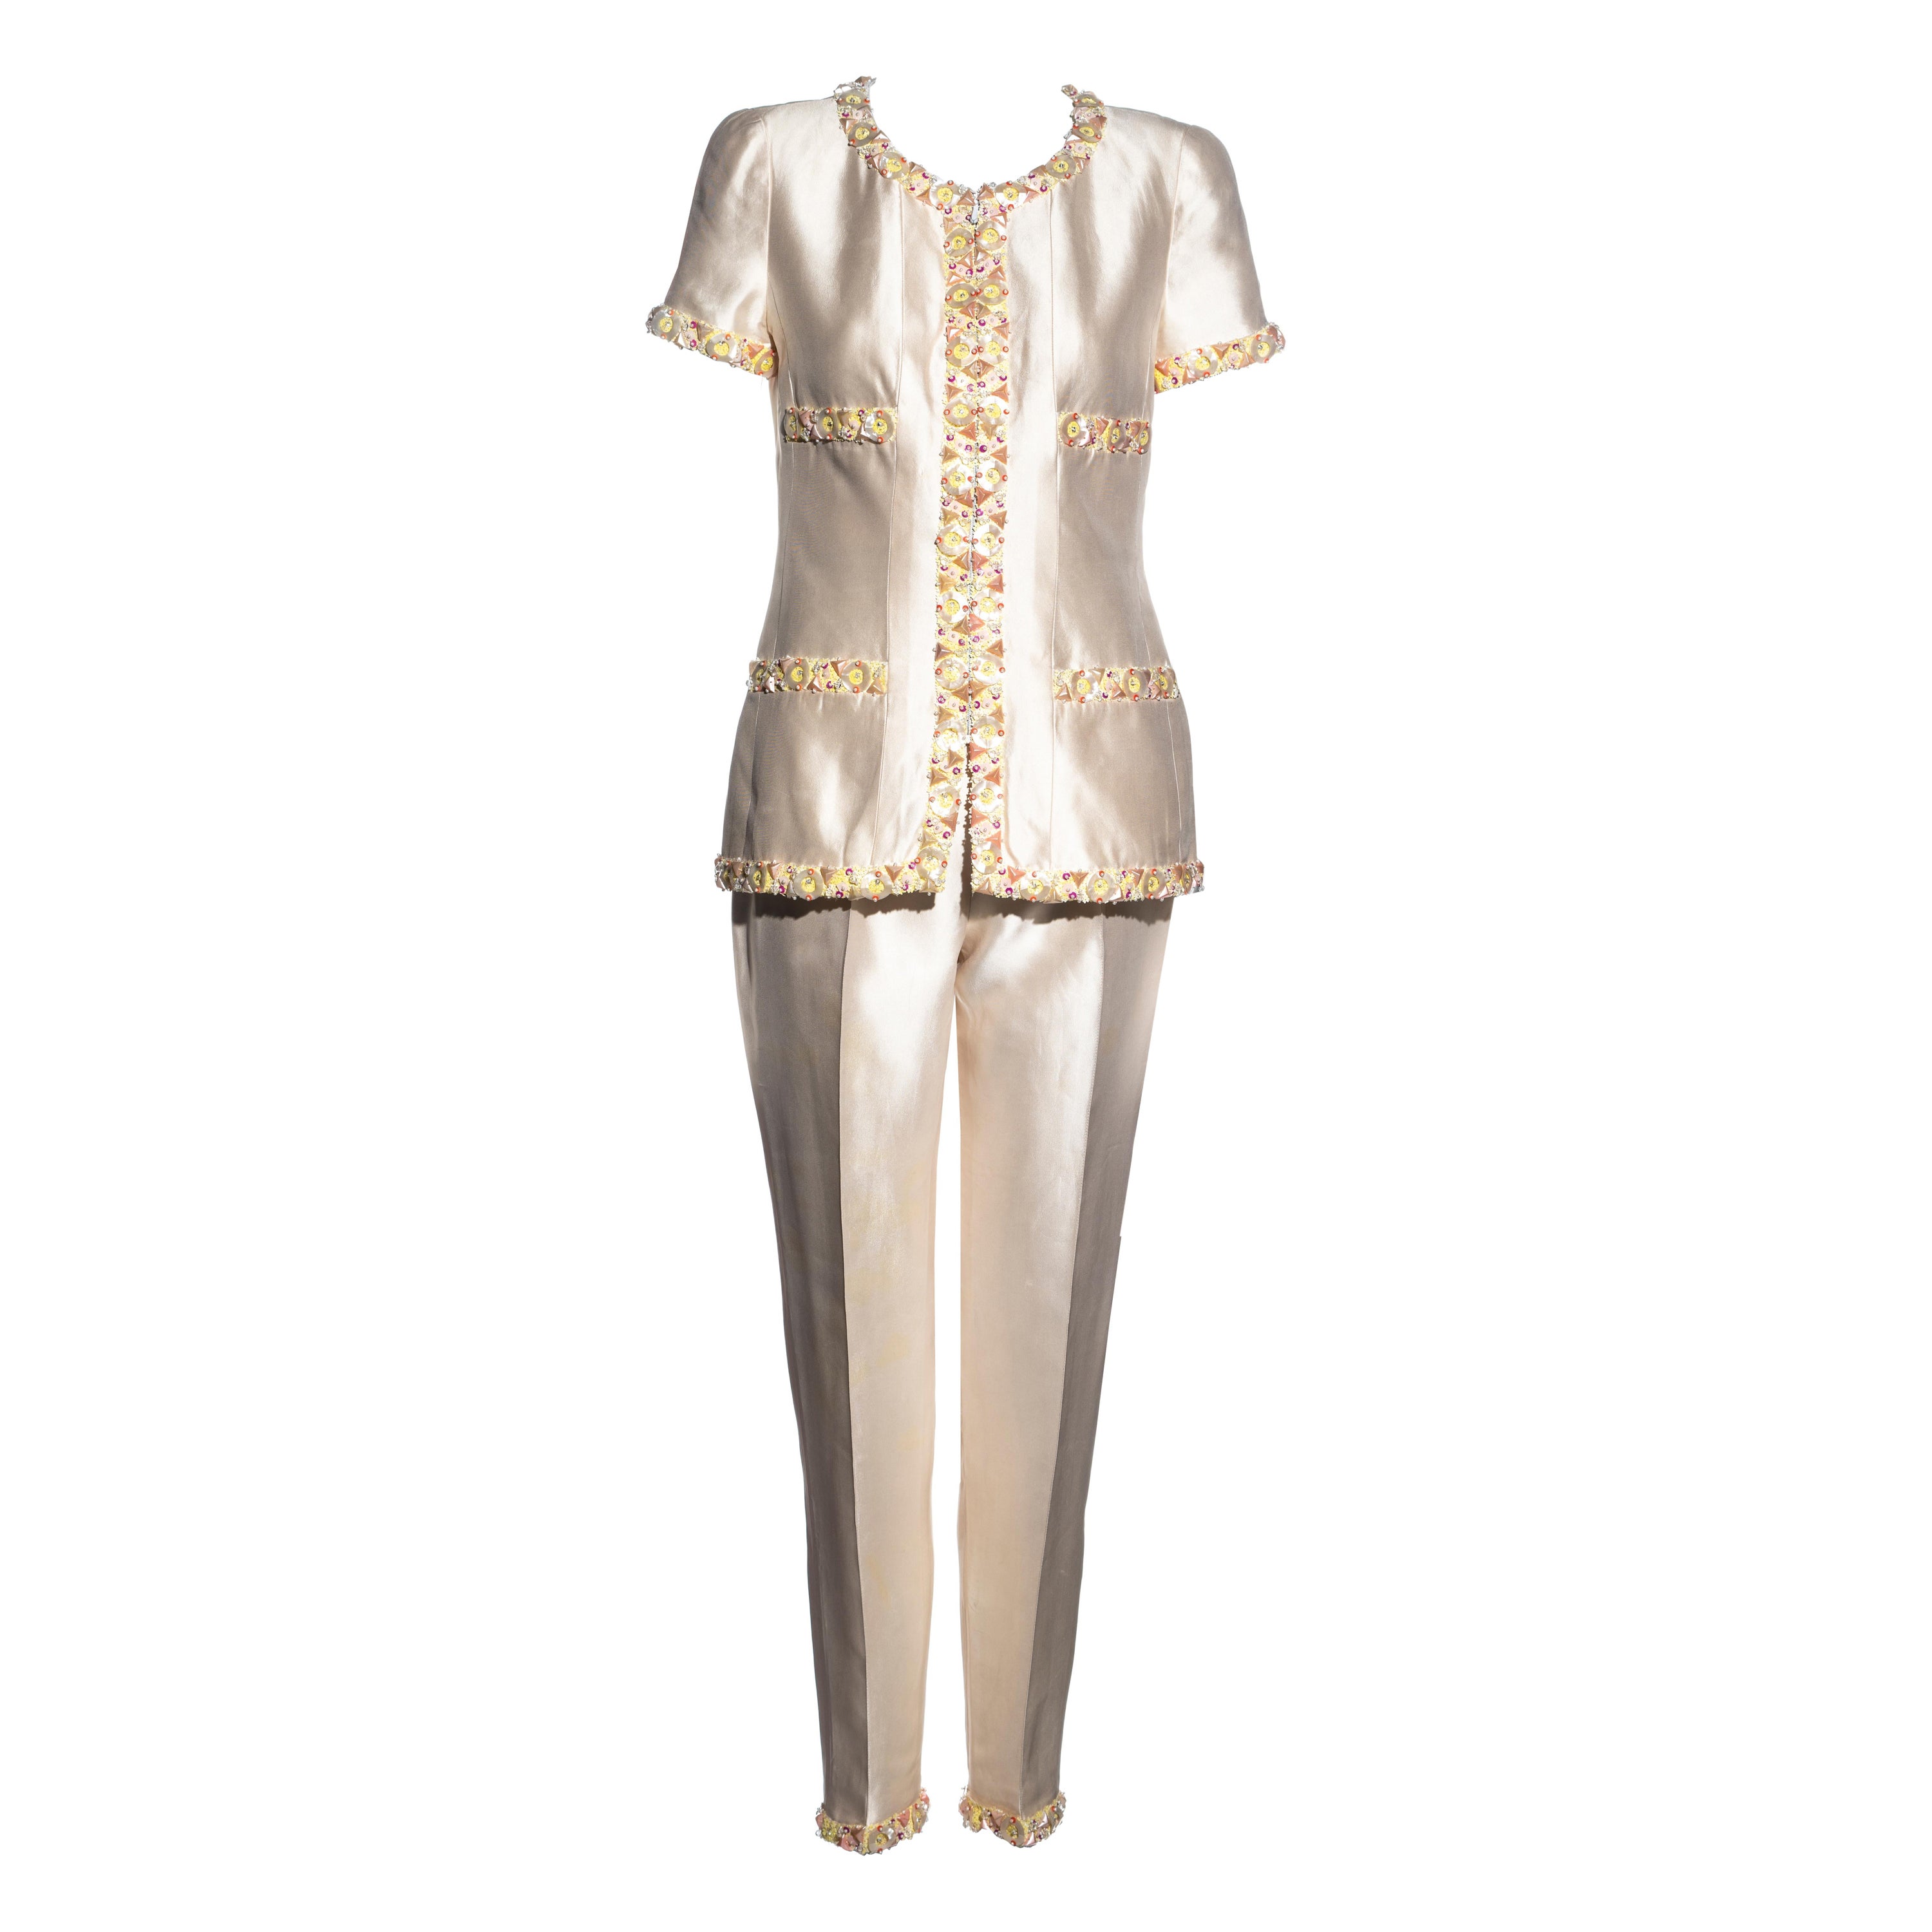 Chanel by Karl Lagerfeld ivory silk embellished evening pant suit, ss 1996